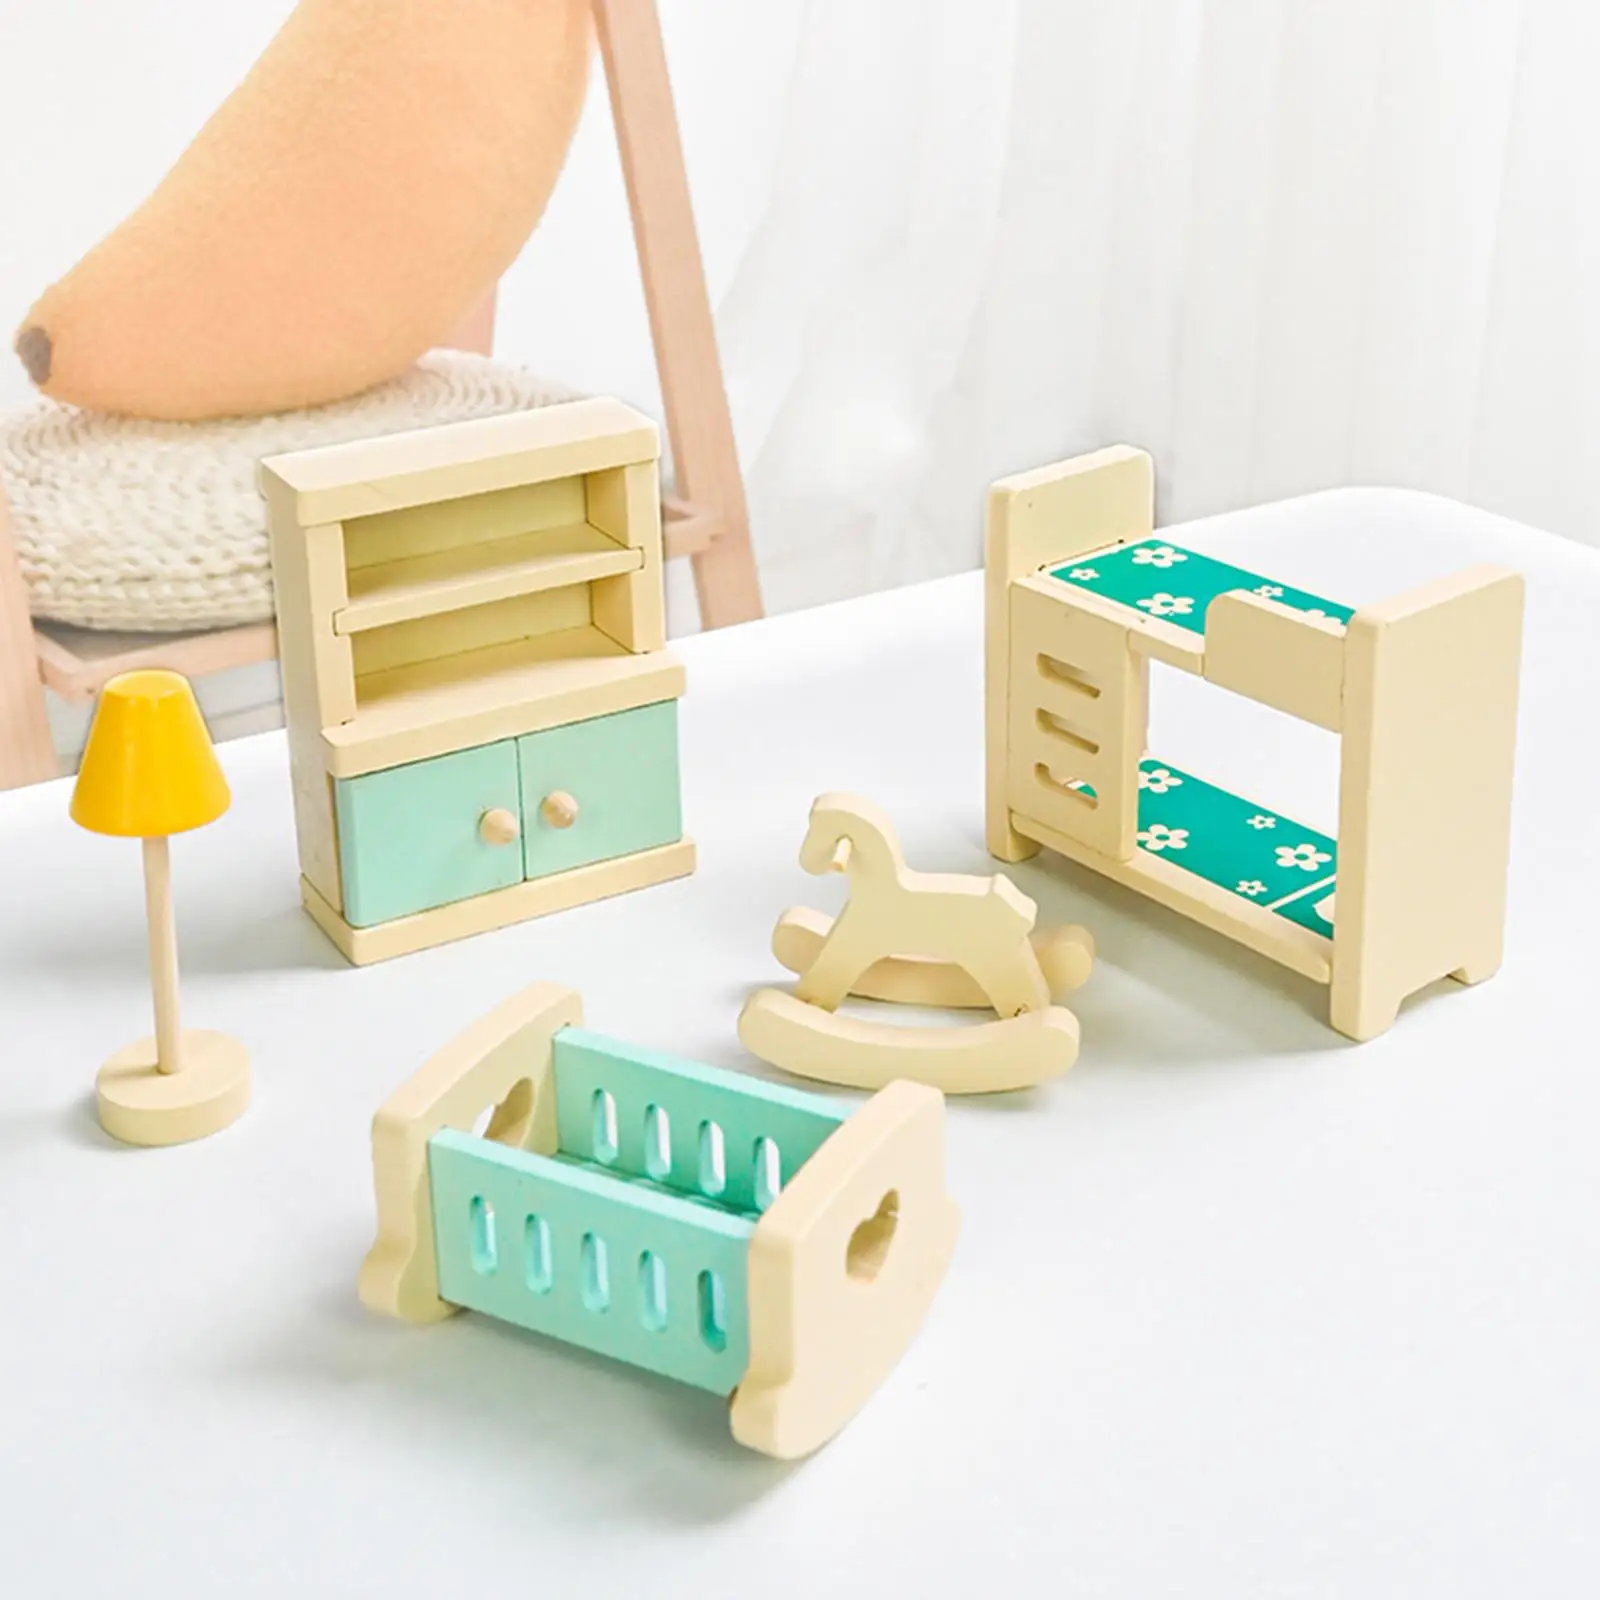 Wooden Dollhouse Furniture Set Miniature Play Scene Model for Decoration